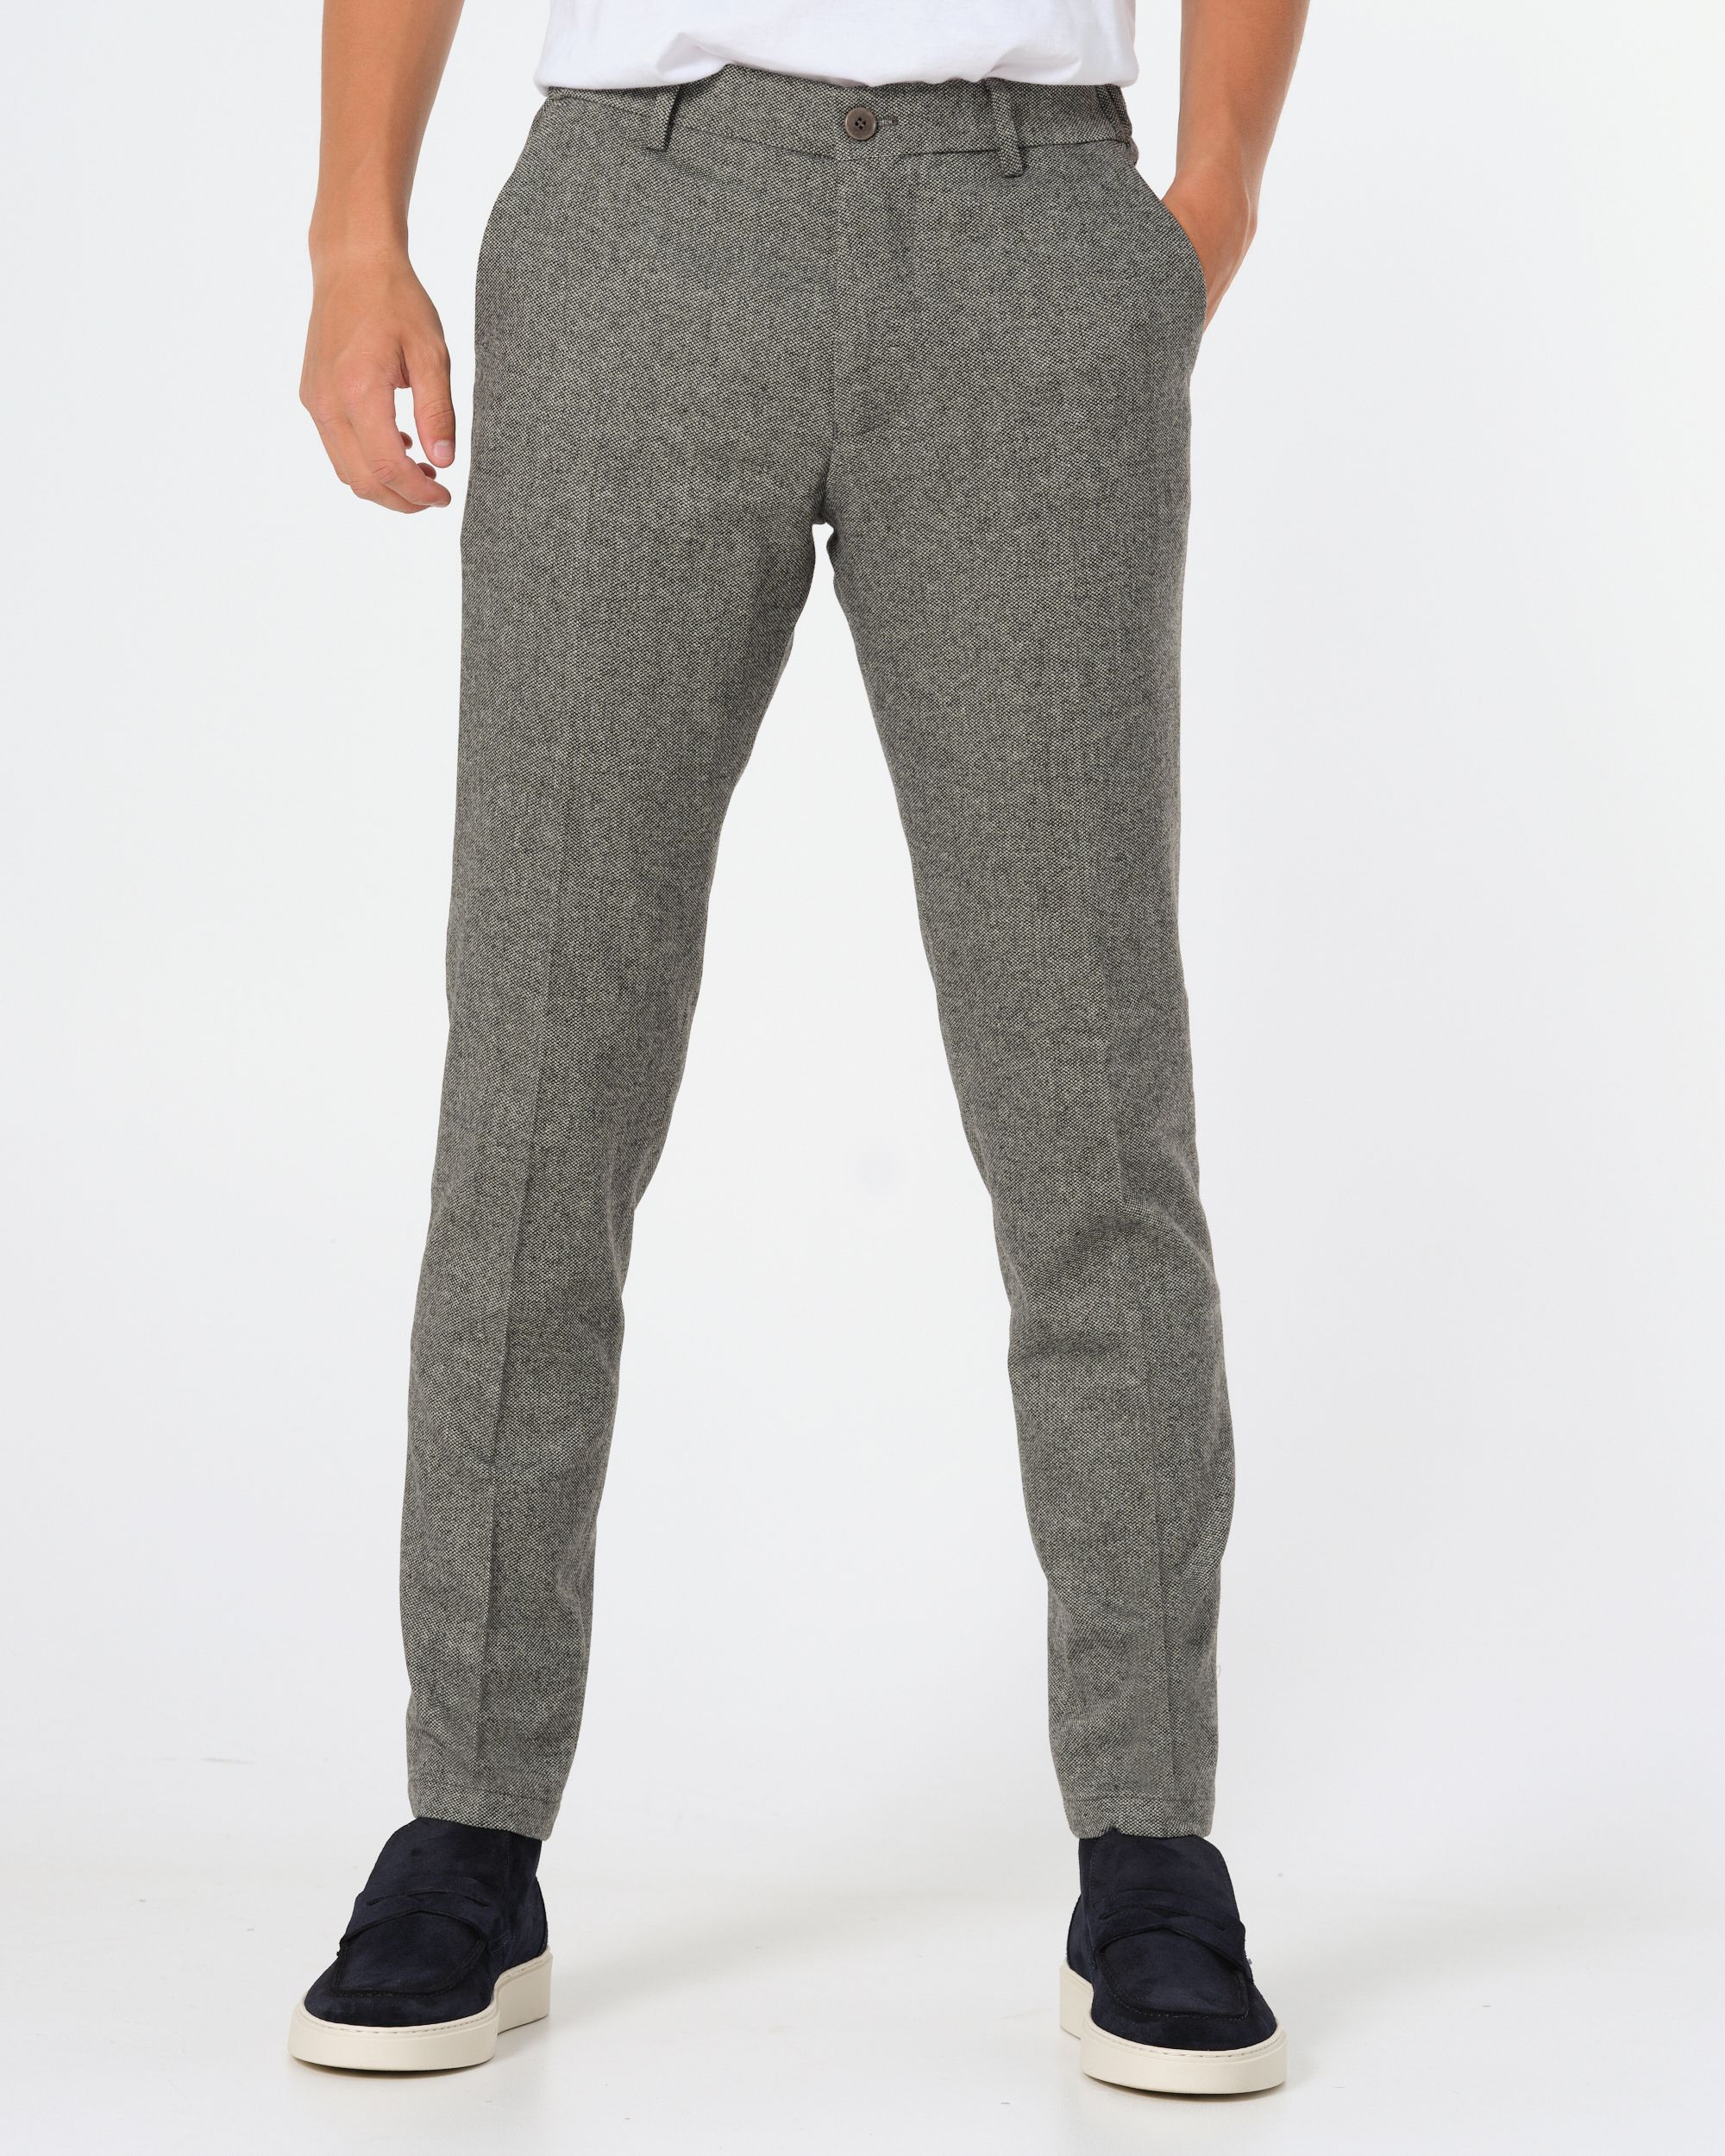 Drykorn Ajend Chino Grijs 086840-001-29/32